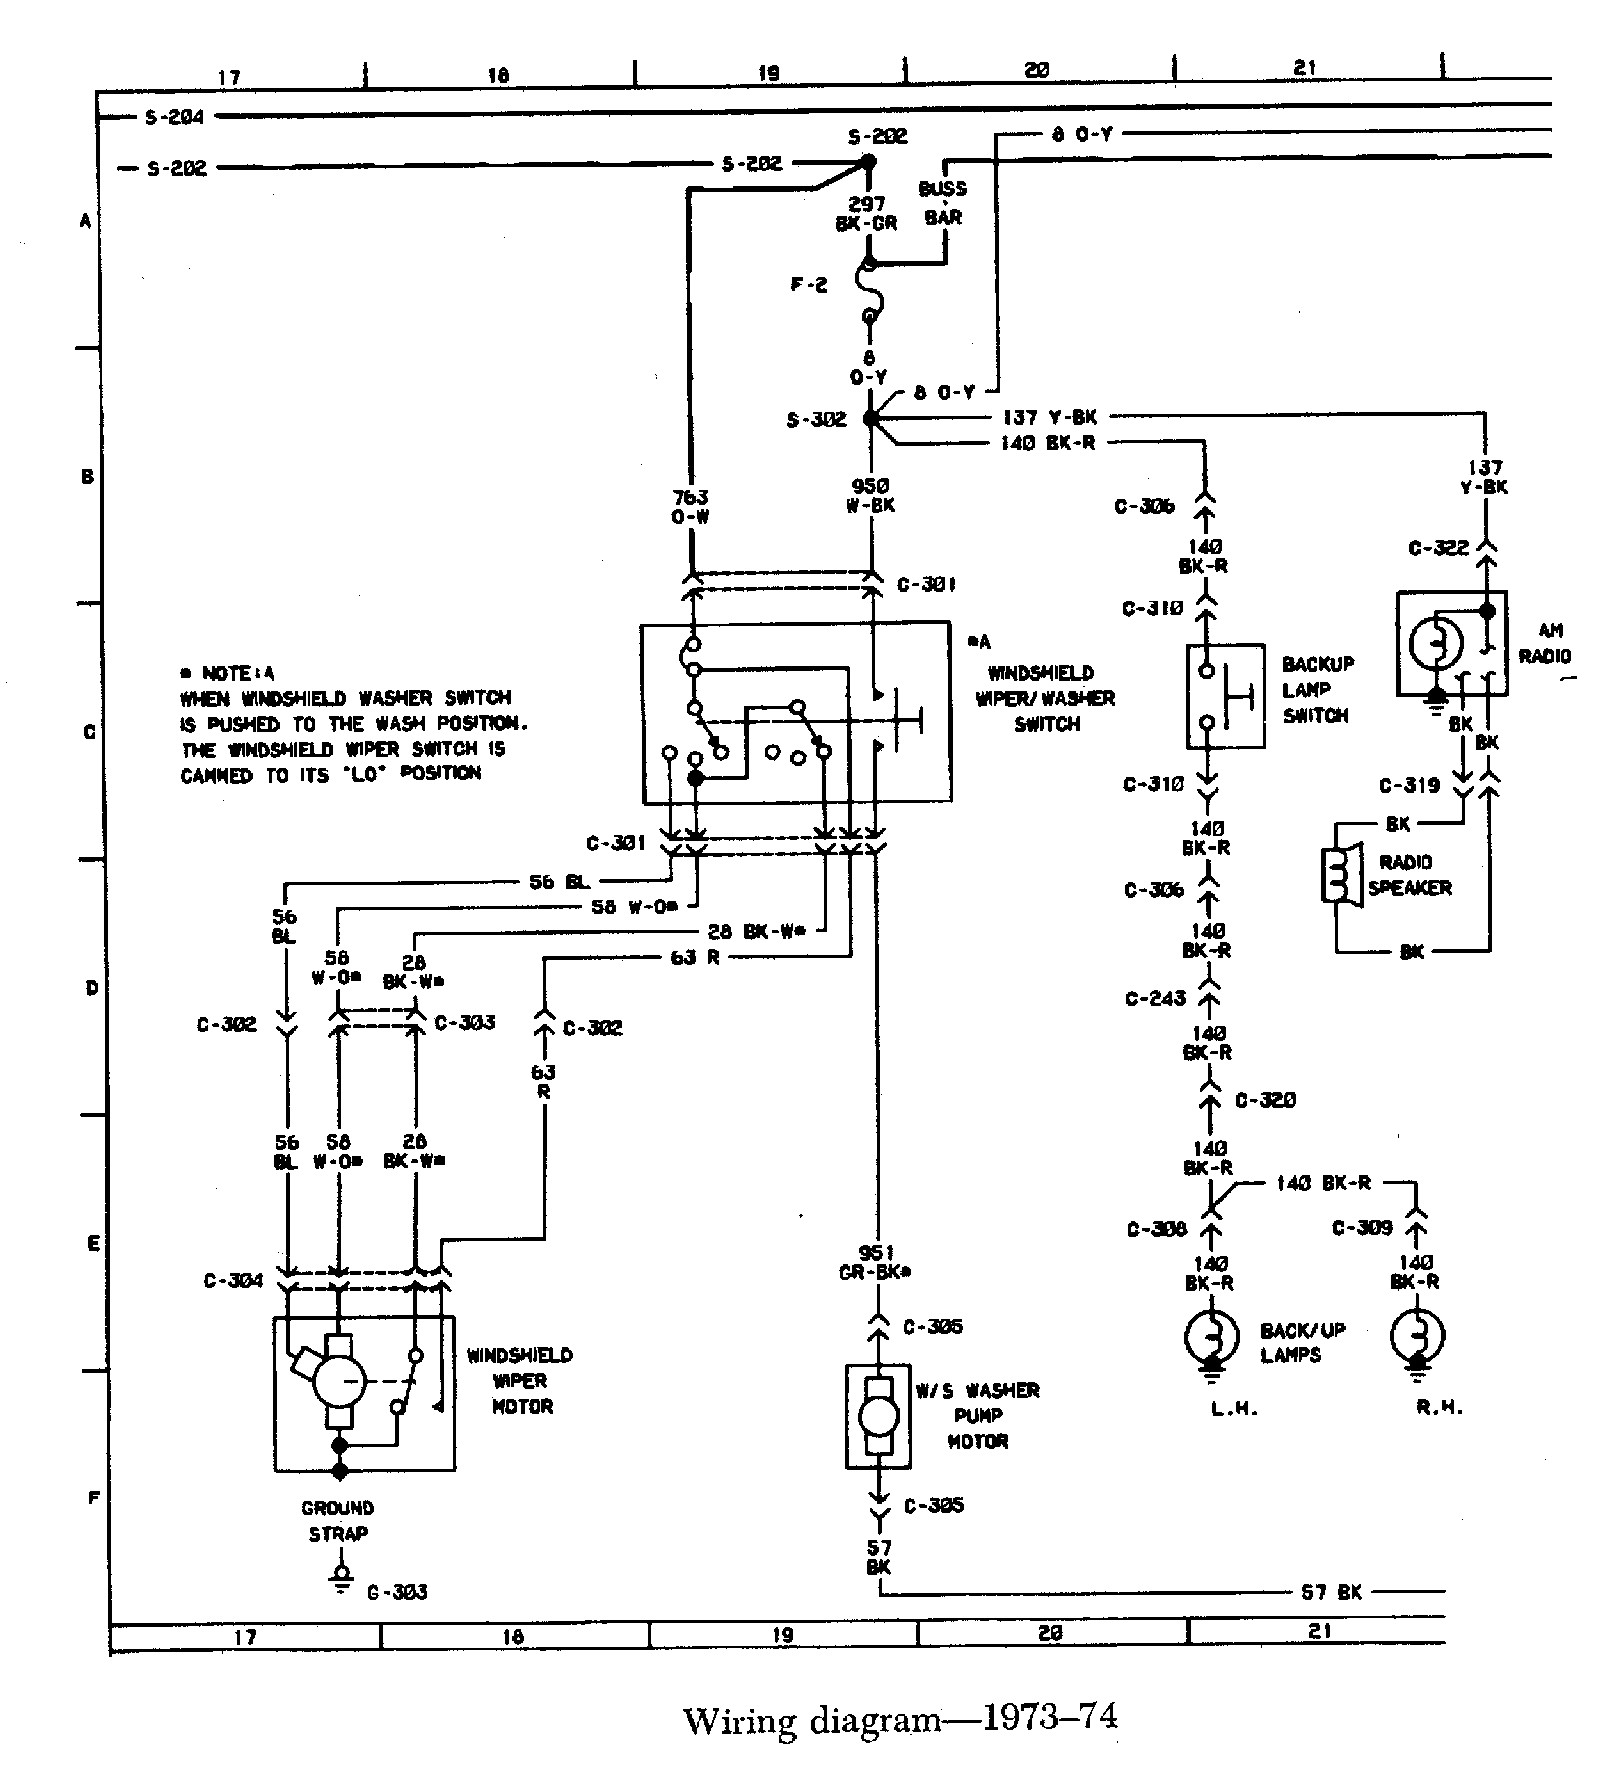 Fuel Injection Technical Library Early Bronco Wiring Diagrams Pg4 Image Harness Full Size